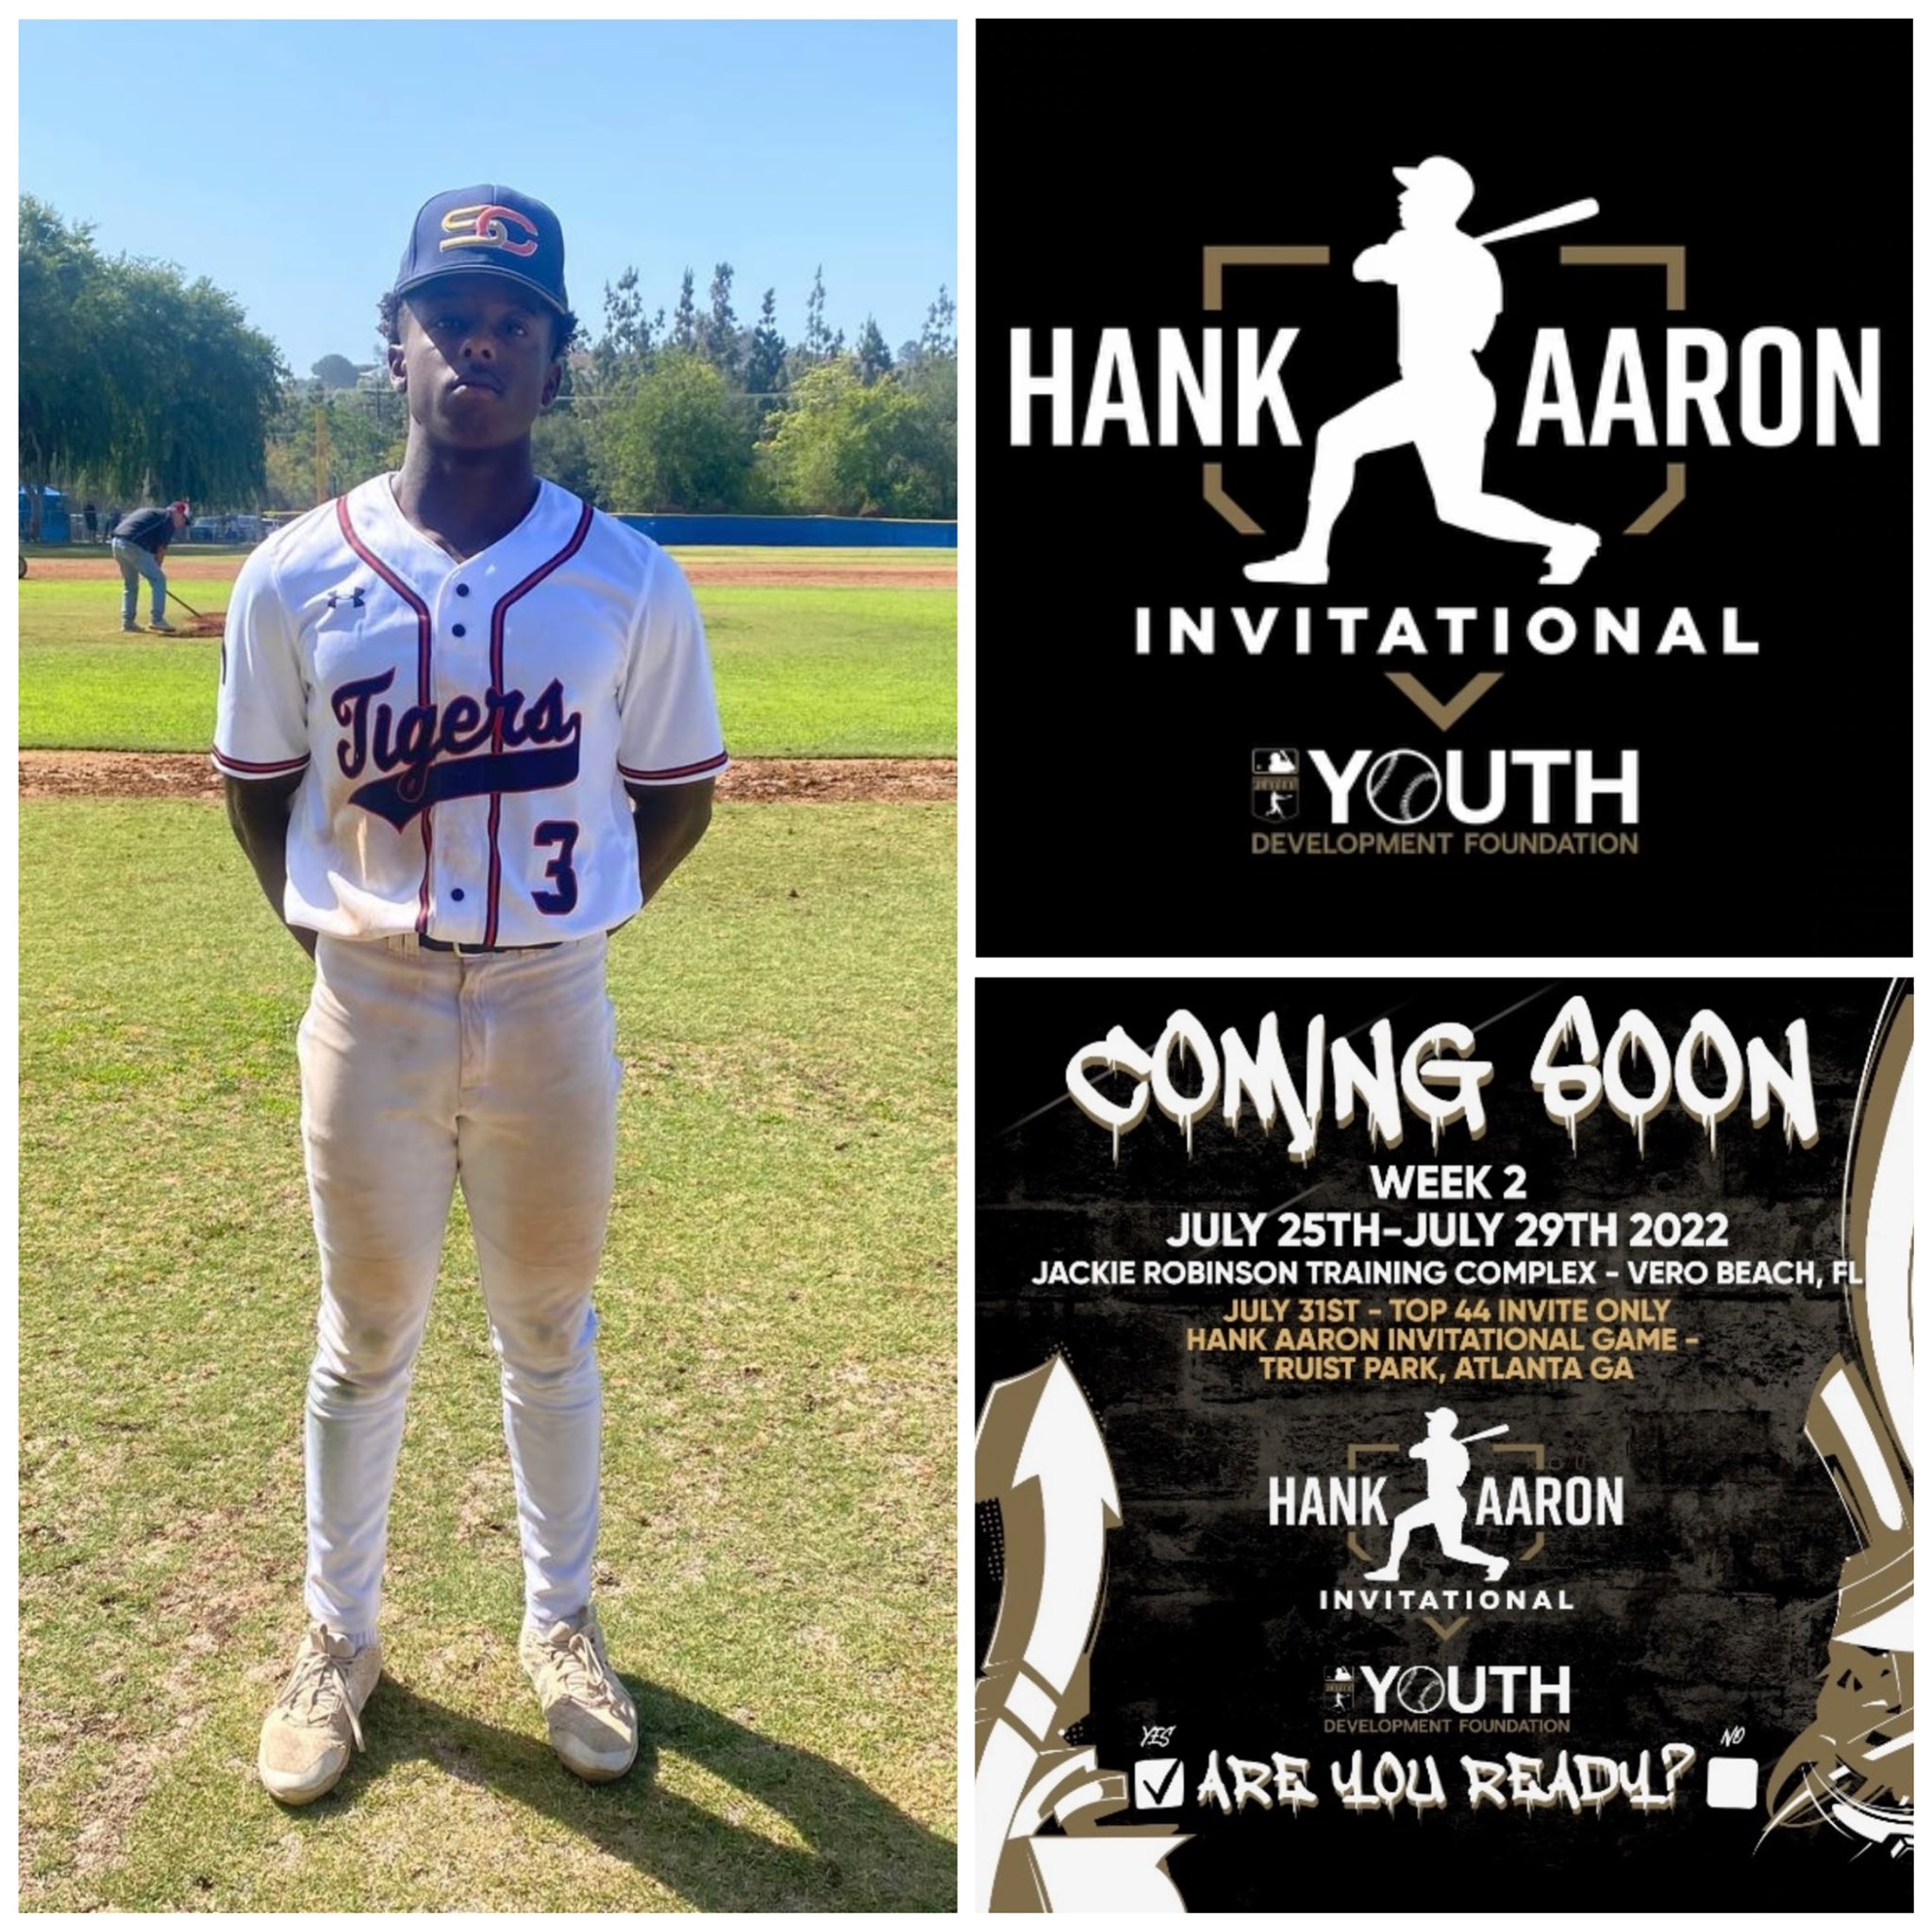 Timmy Reed on X: I am blessed and thankful for the opportunity to be  selected for the 2022 Hank Aaron Invitational in Vero Beach Florida. Would  also like to thank all my